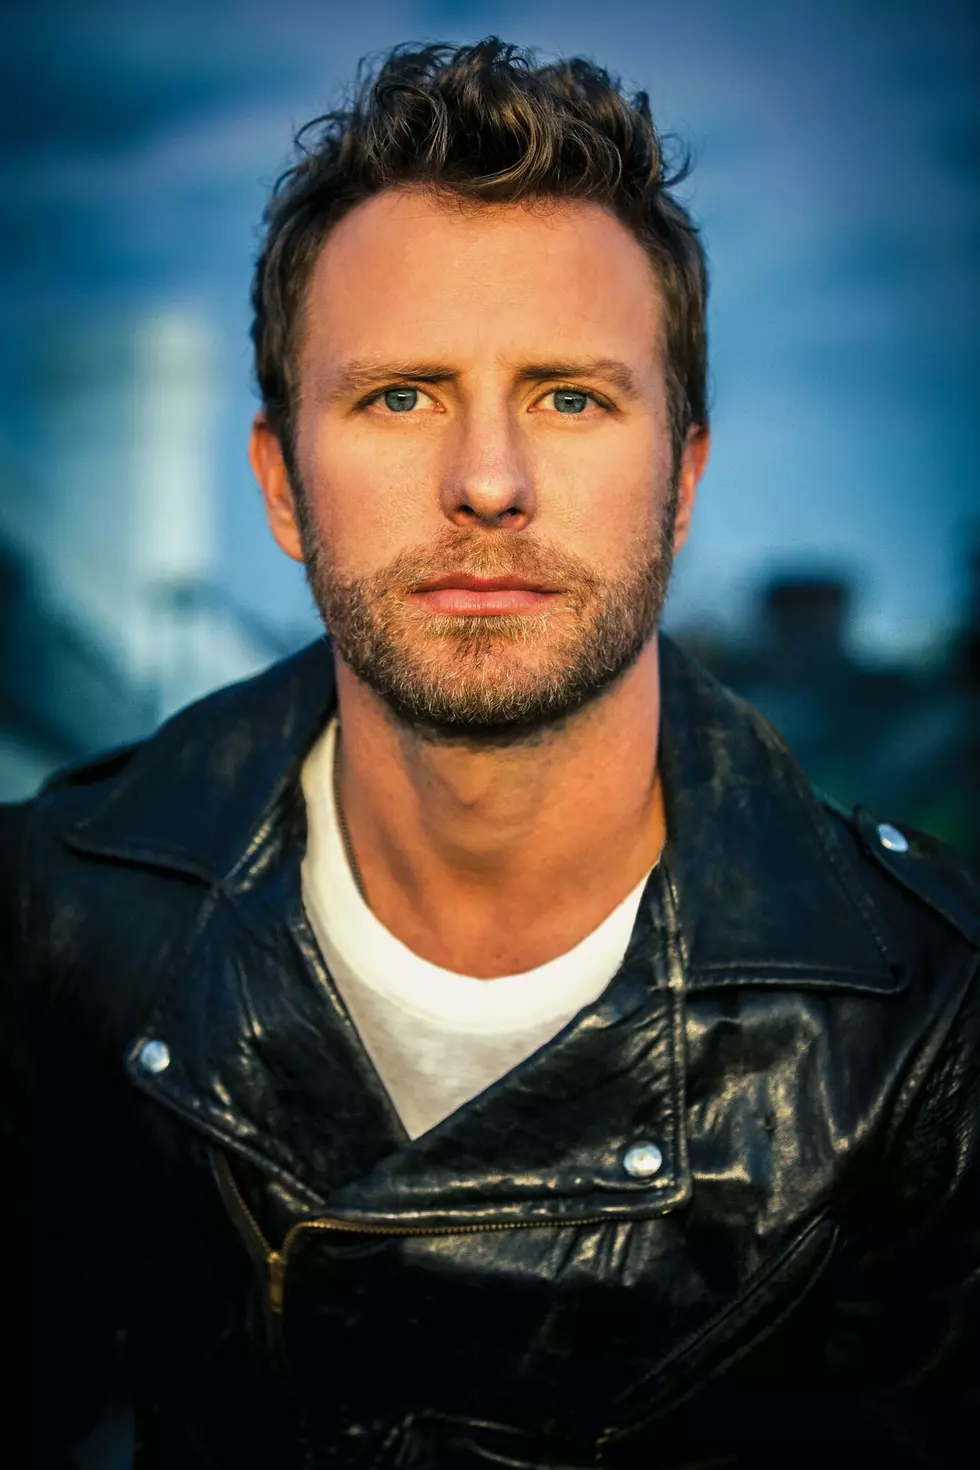 Dierks Bentley Playlist – Getting You Ready for His Show at Tuscaloosa Amphitheater